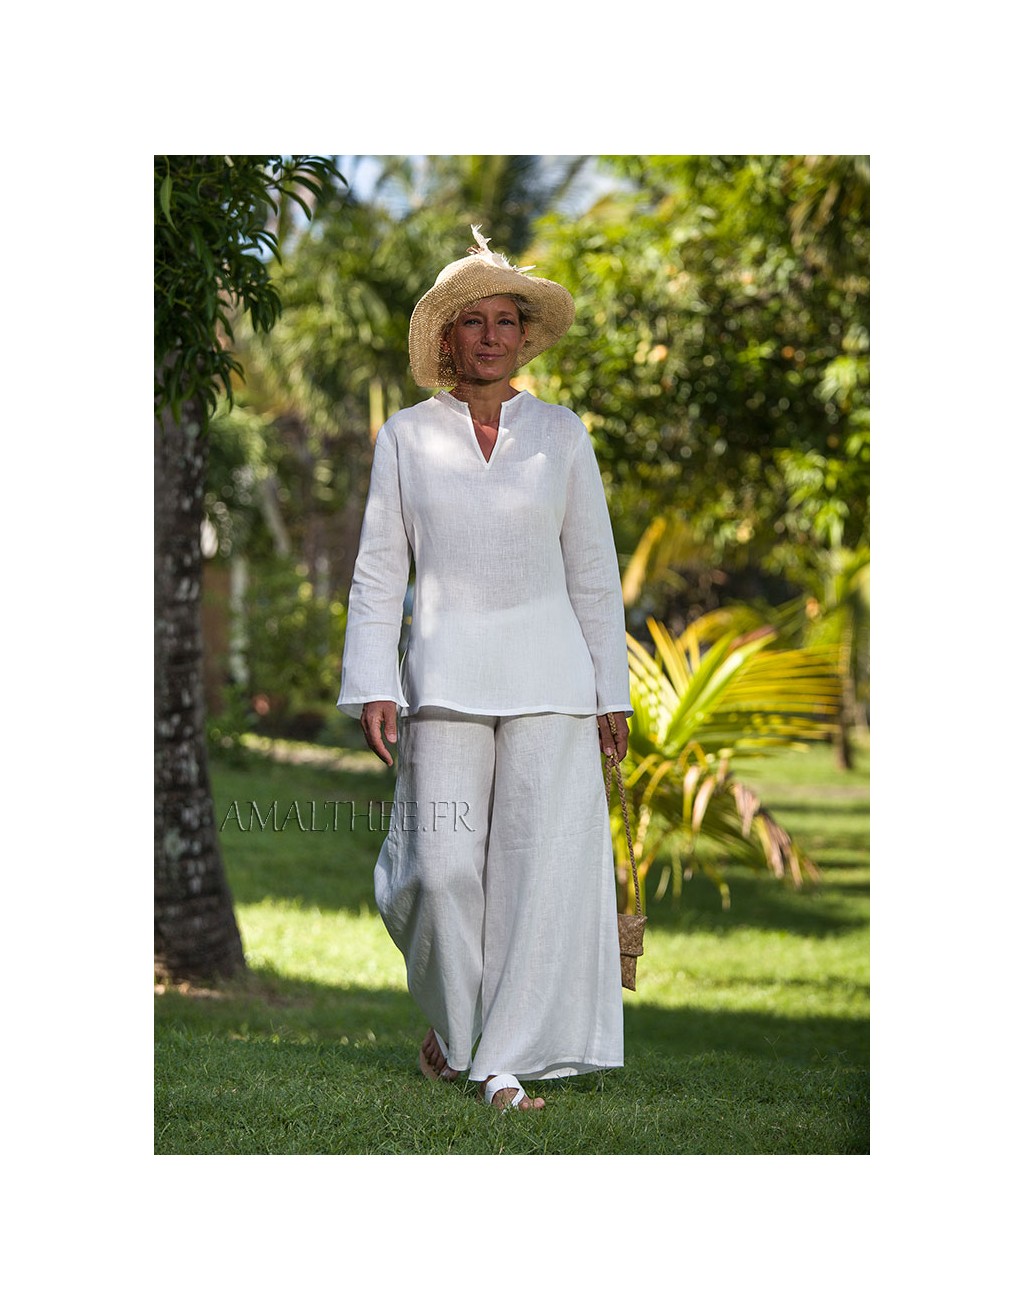 White linen tropical wedding outfit